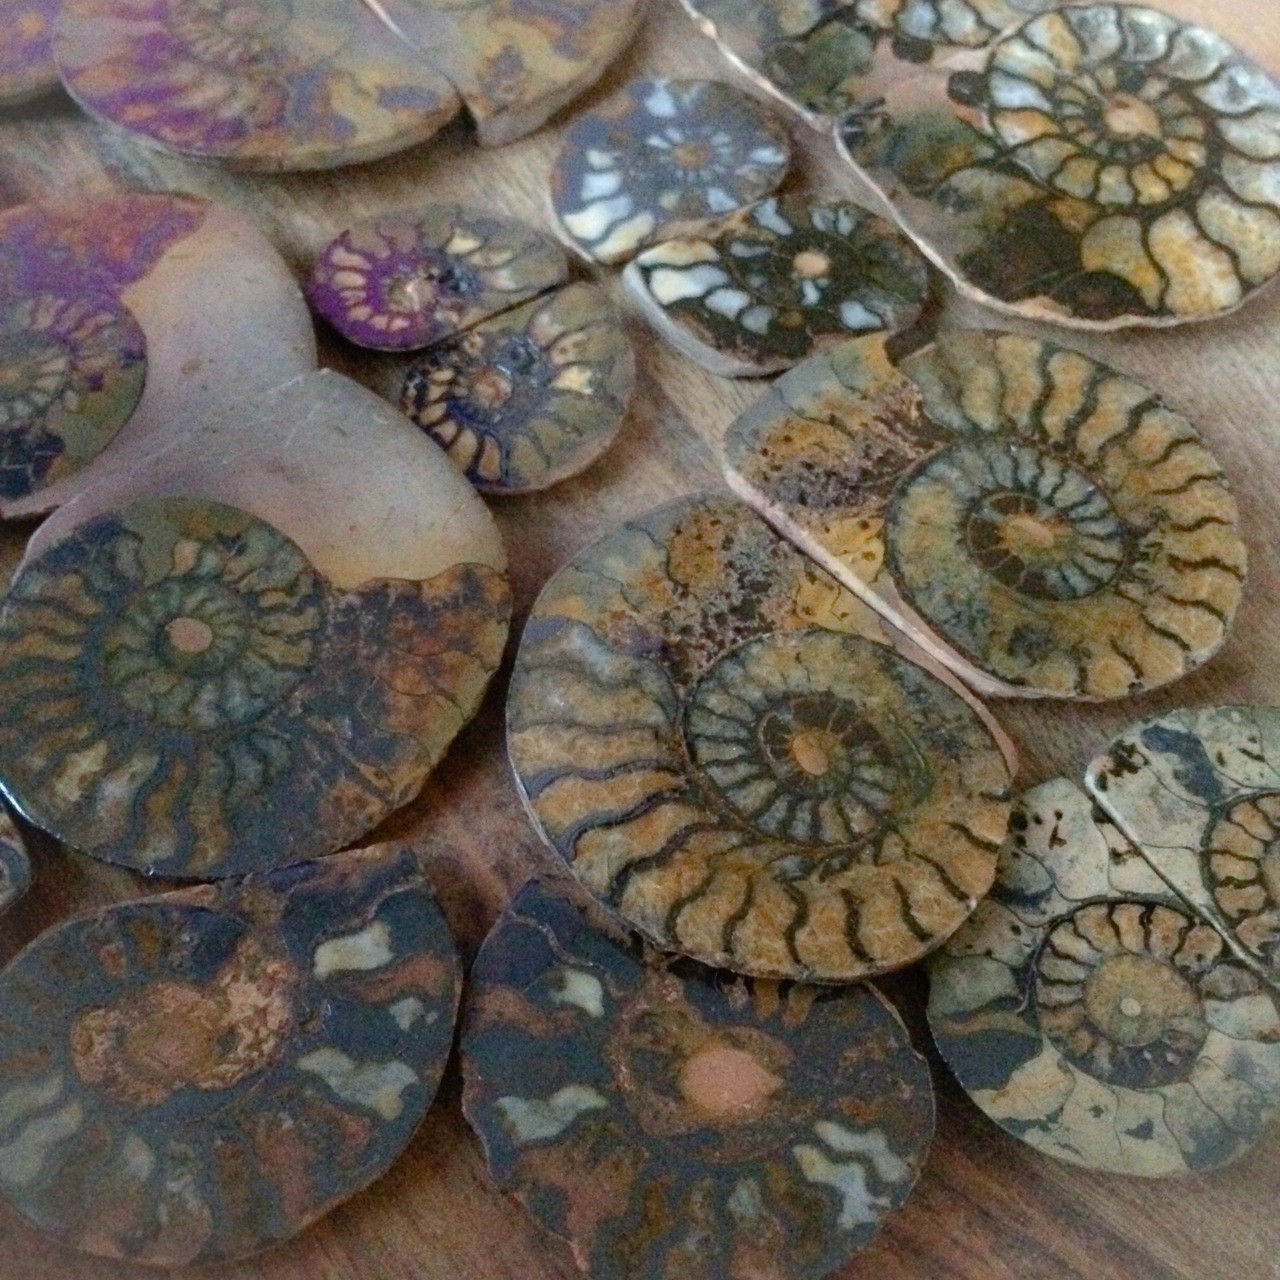 Pair of Ammonite Fossils - For continual change and evolution